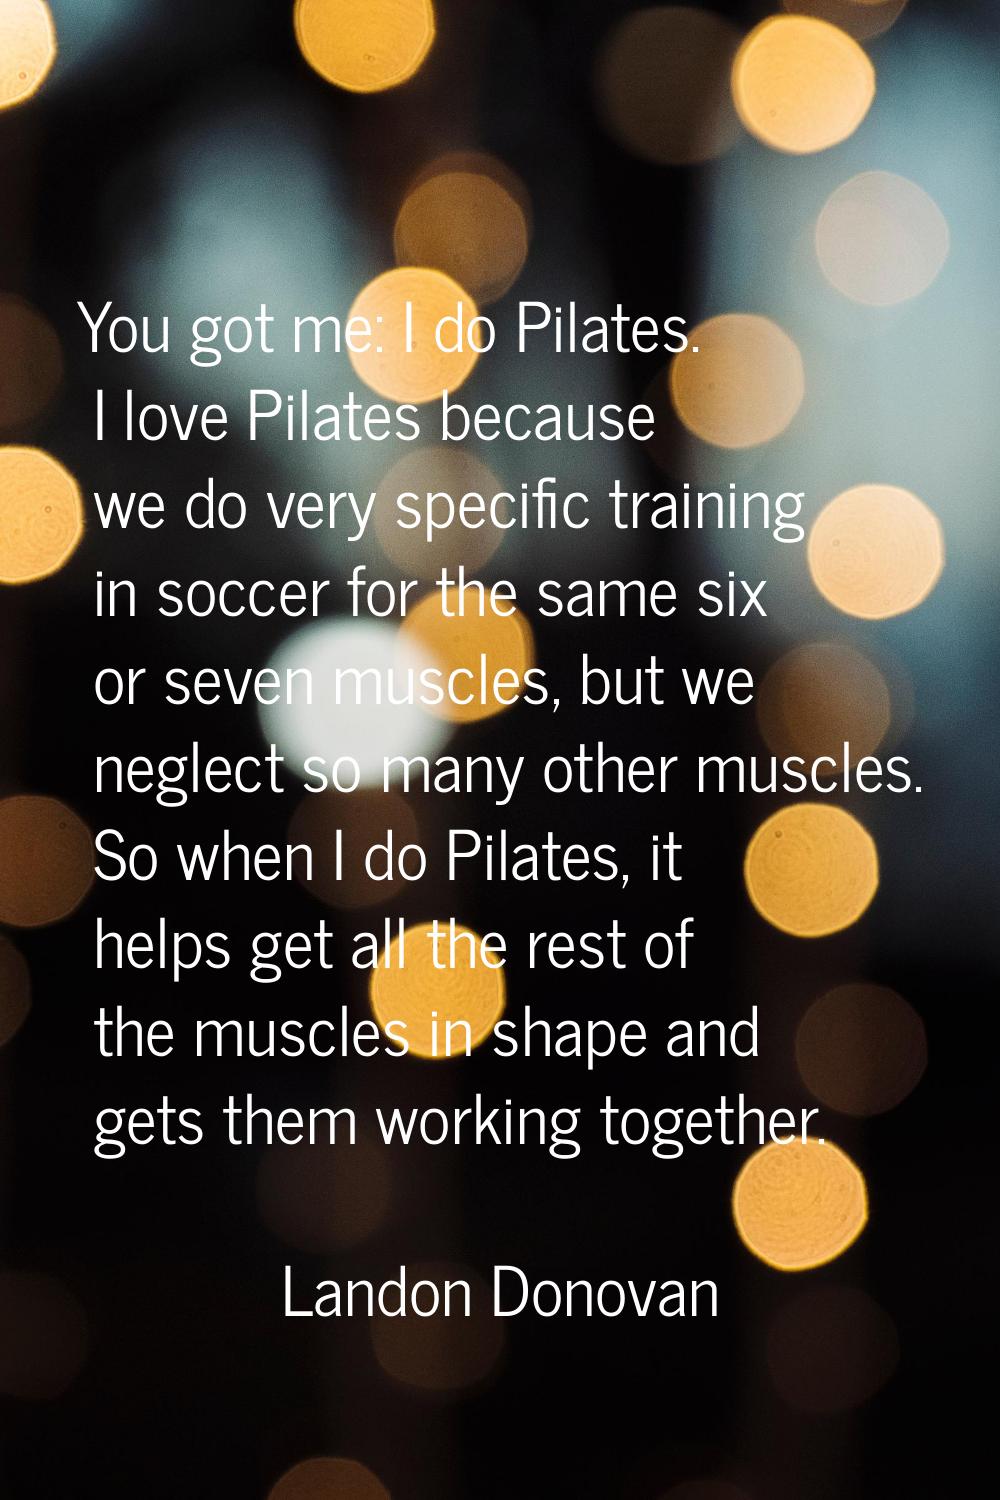 You got me: I do Pilates. I love Pilates because we do very specific training in soccer for the sam